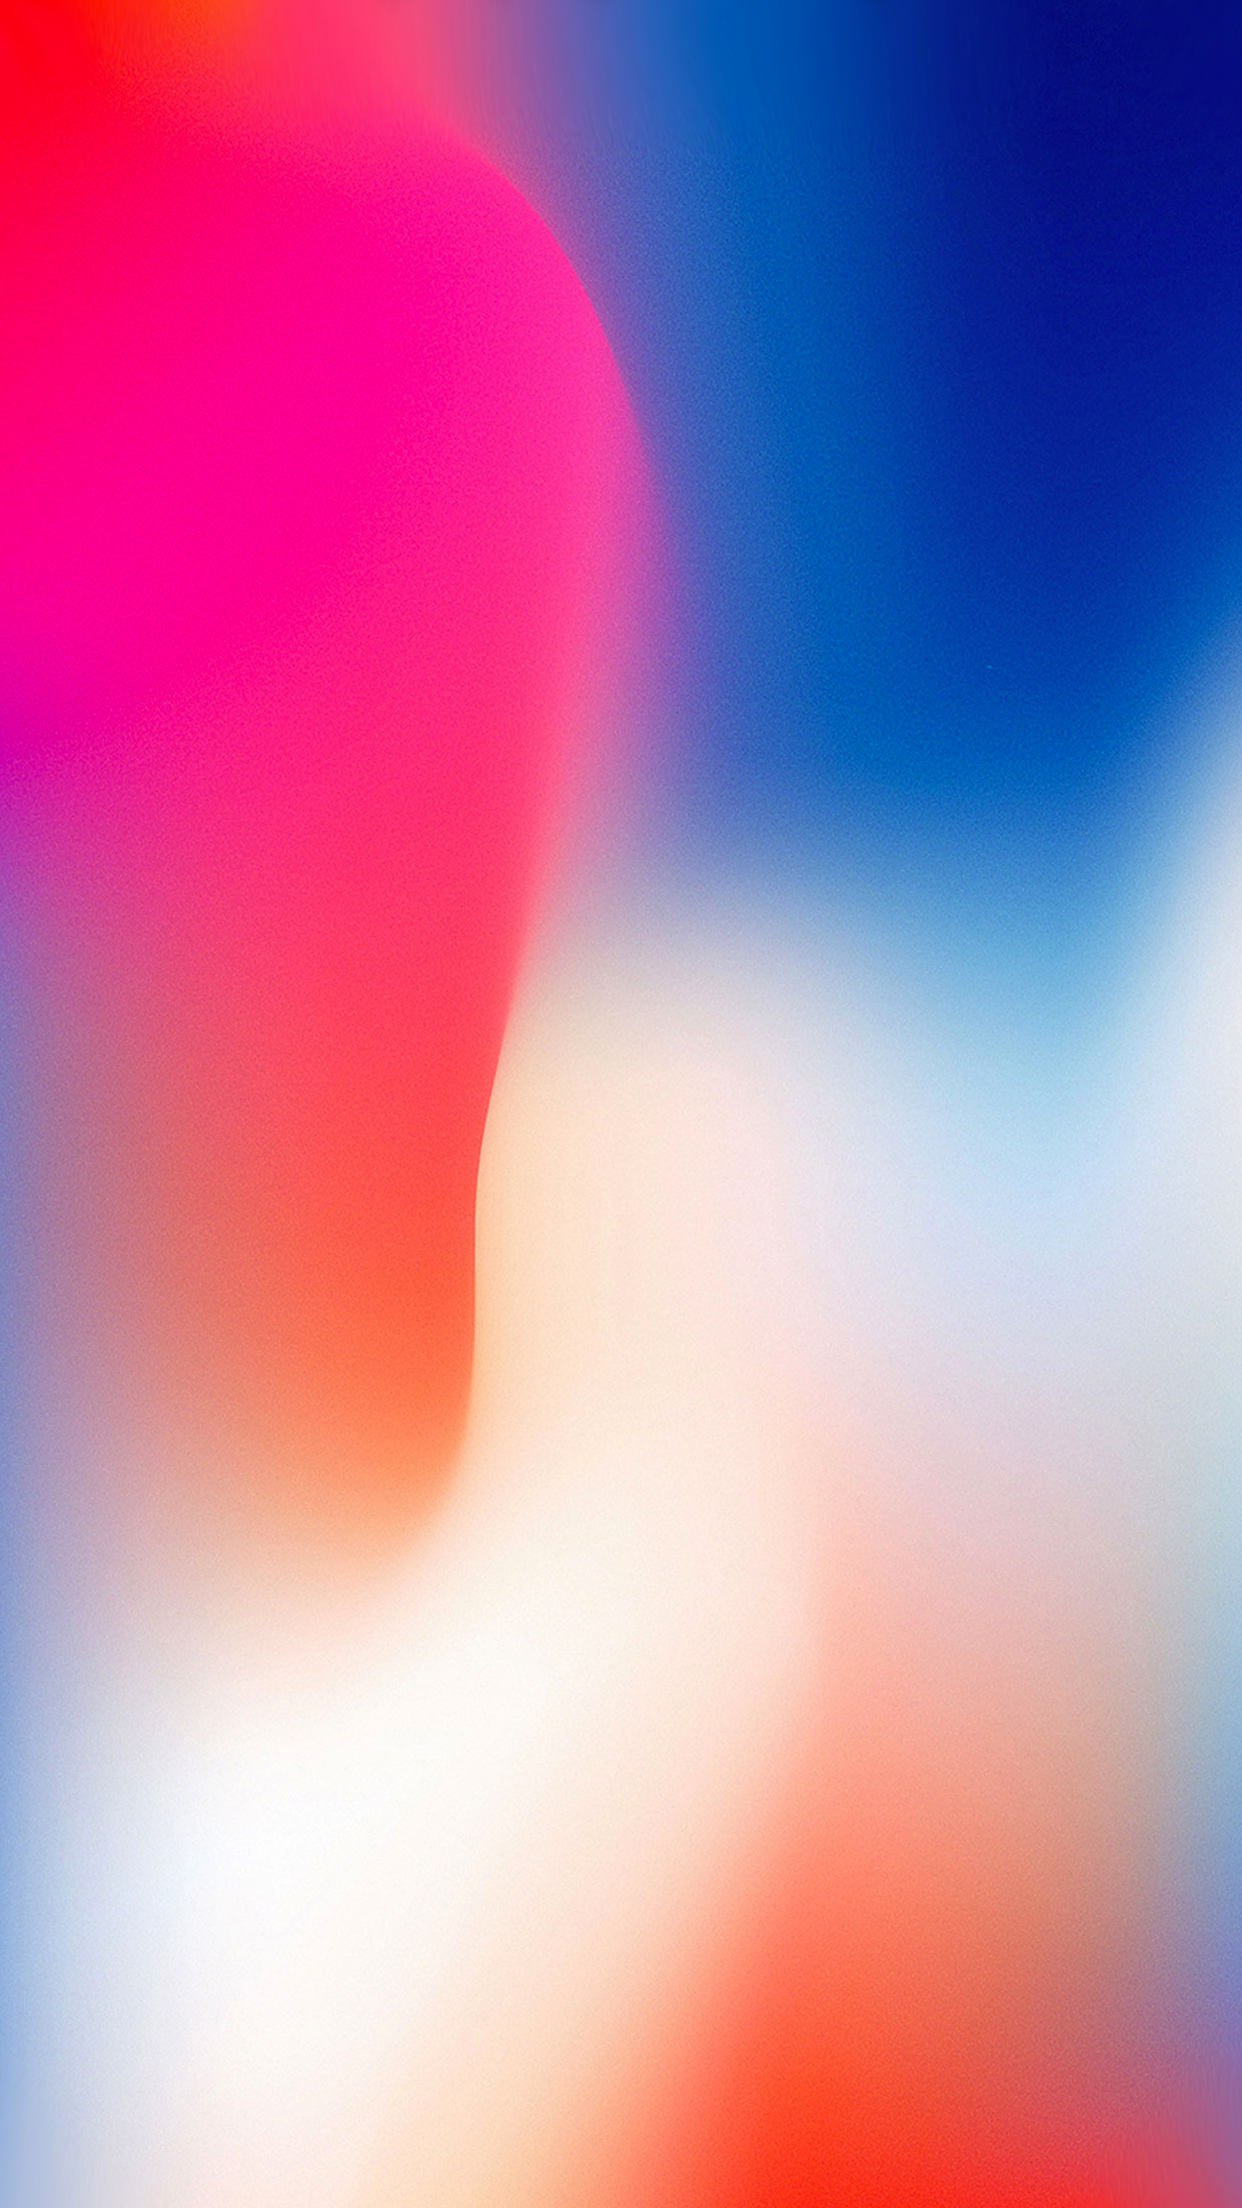 iPhone X wallpapers